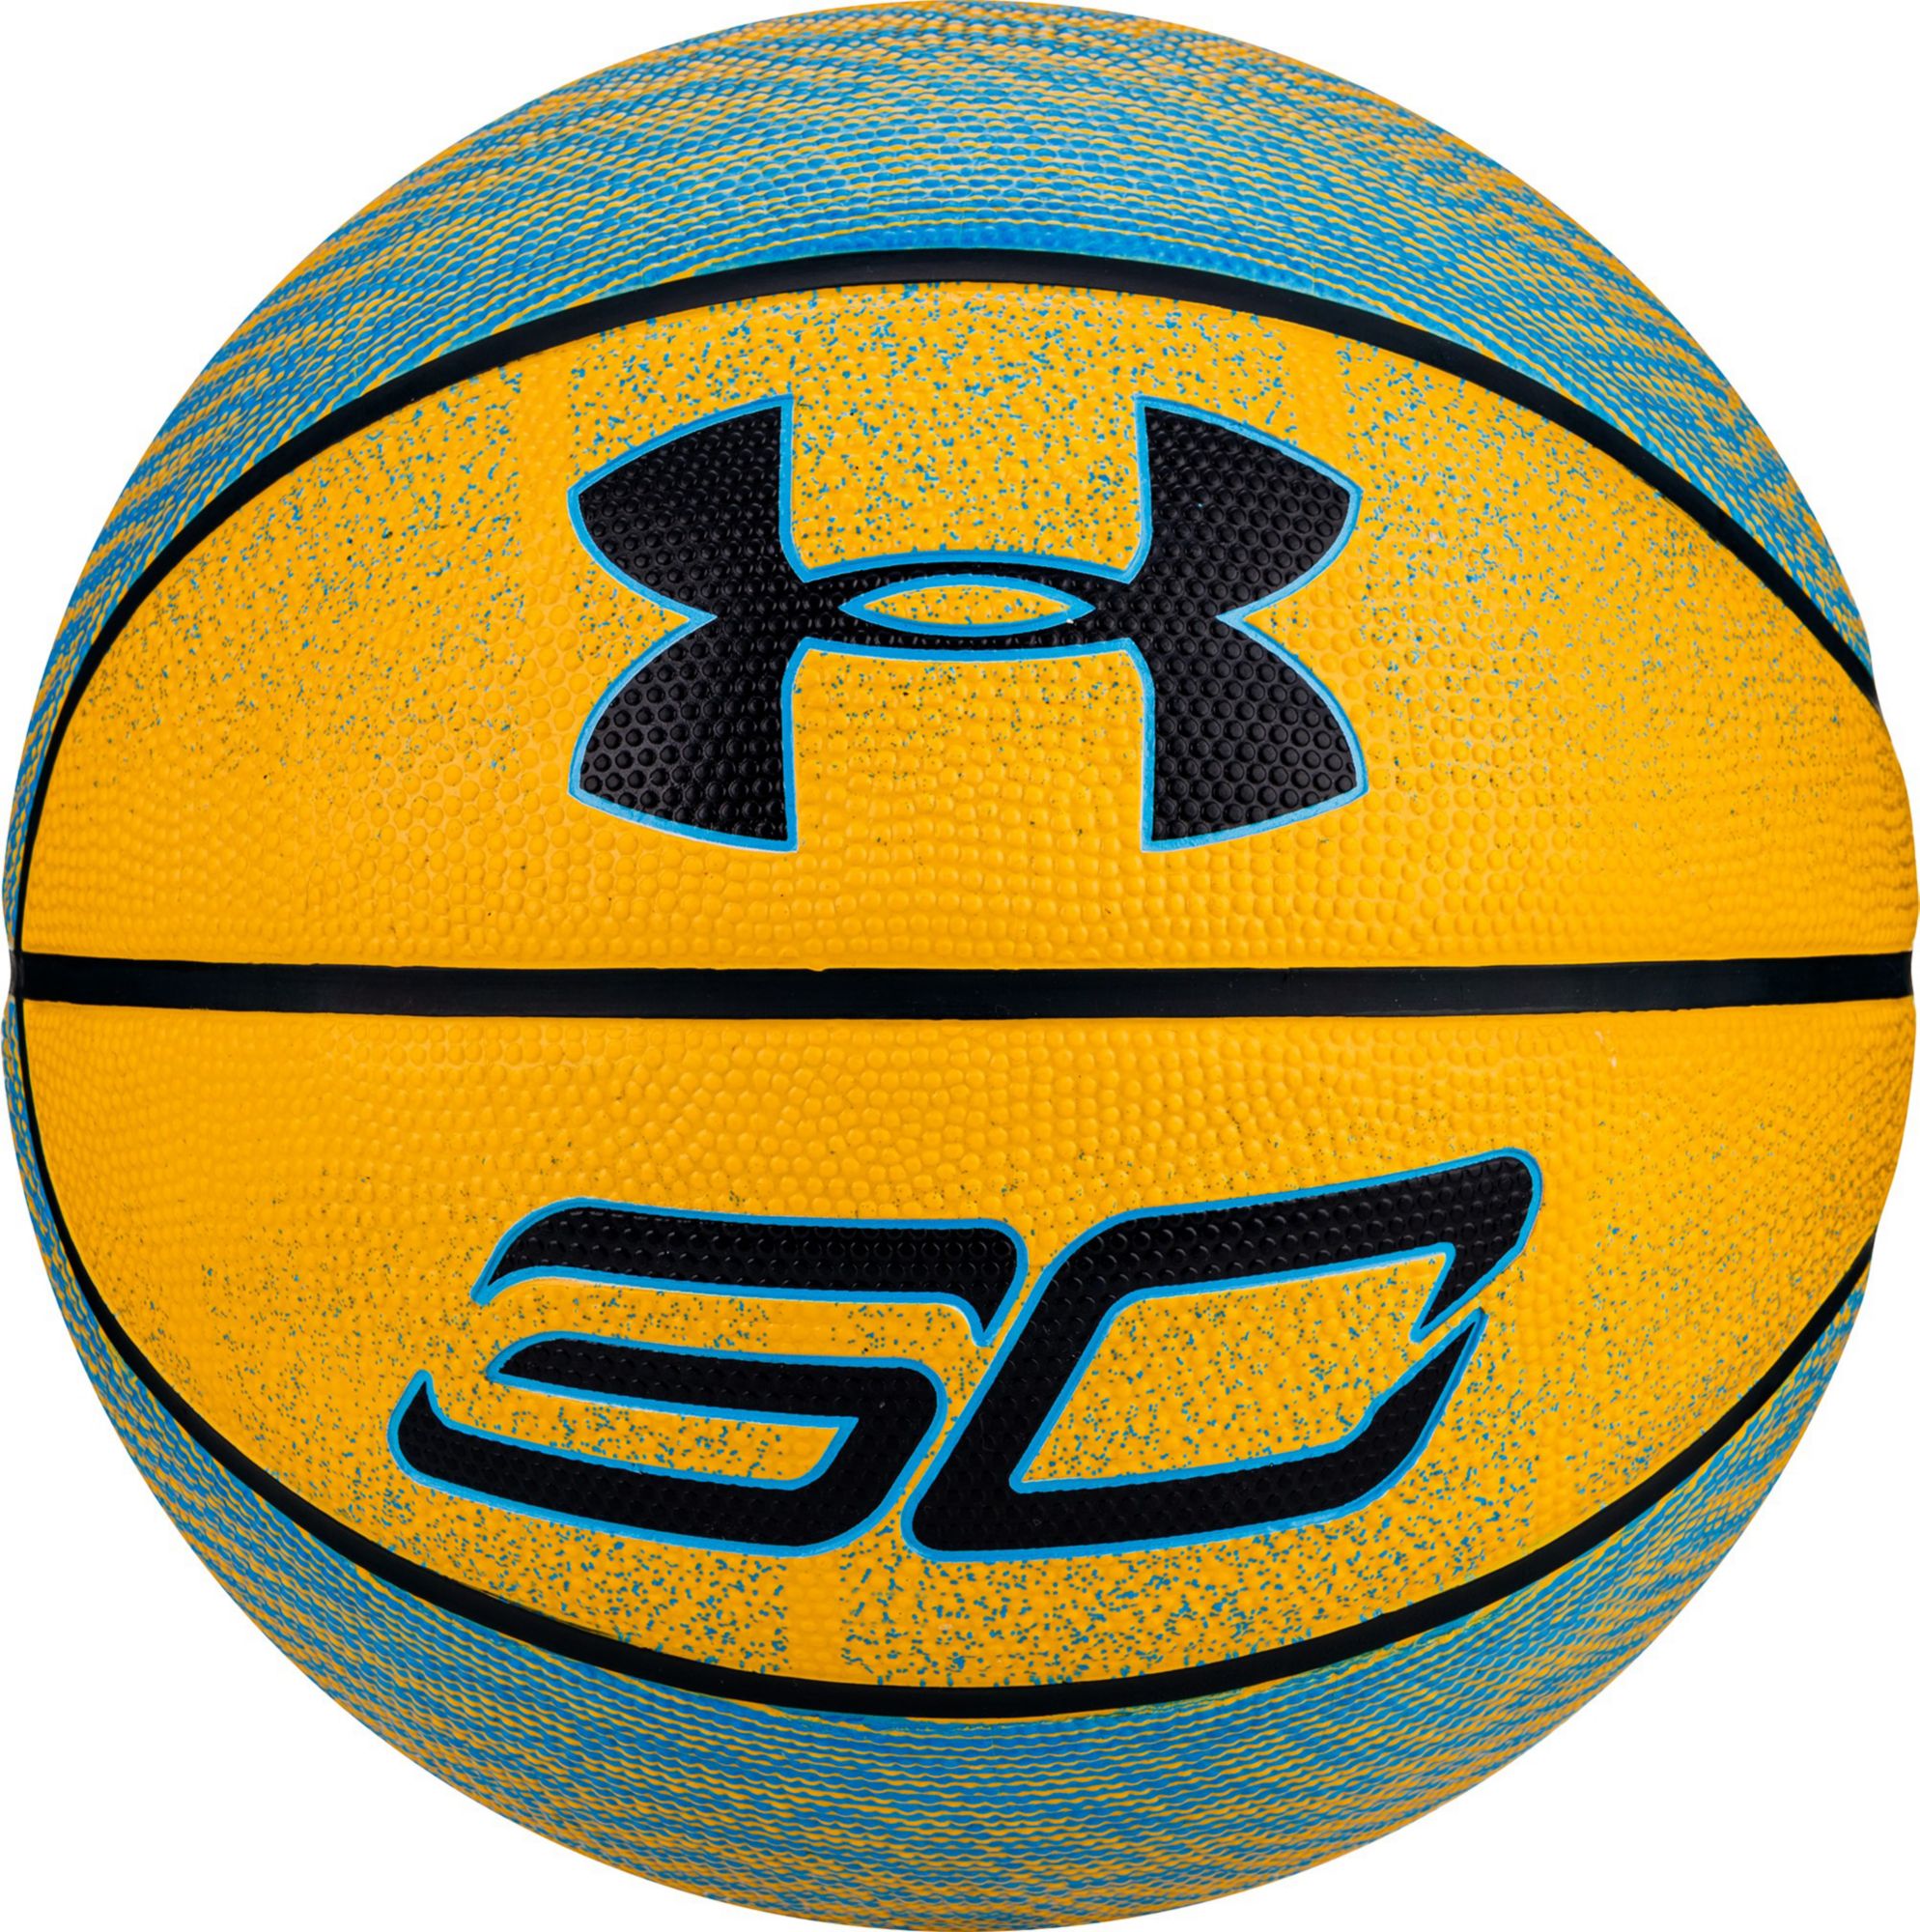 under armour youth basketball